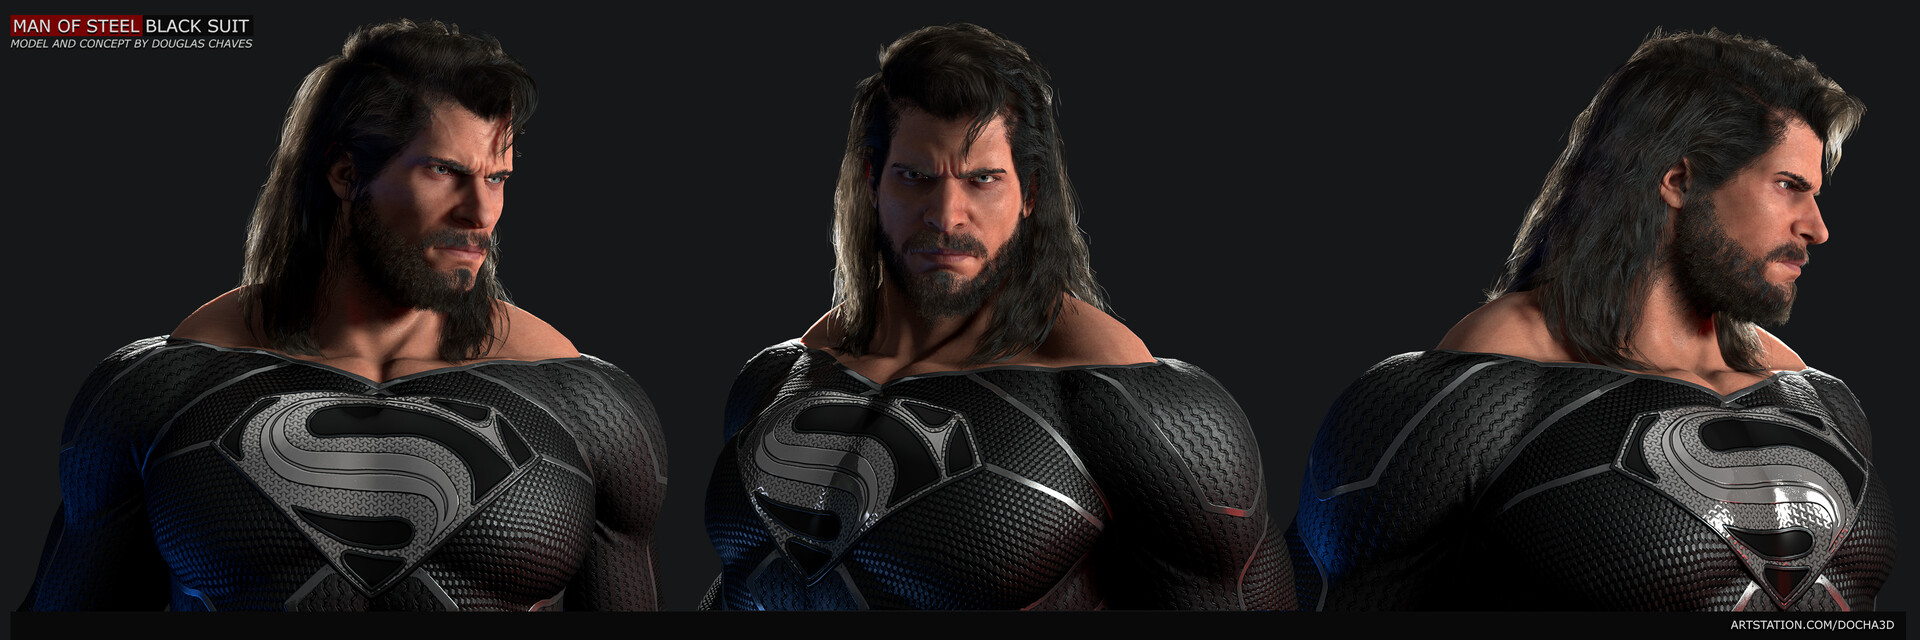 Man of Steel Black Suit by DouglasChaves, Character Art, 3D